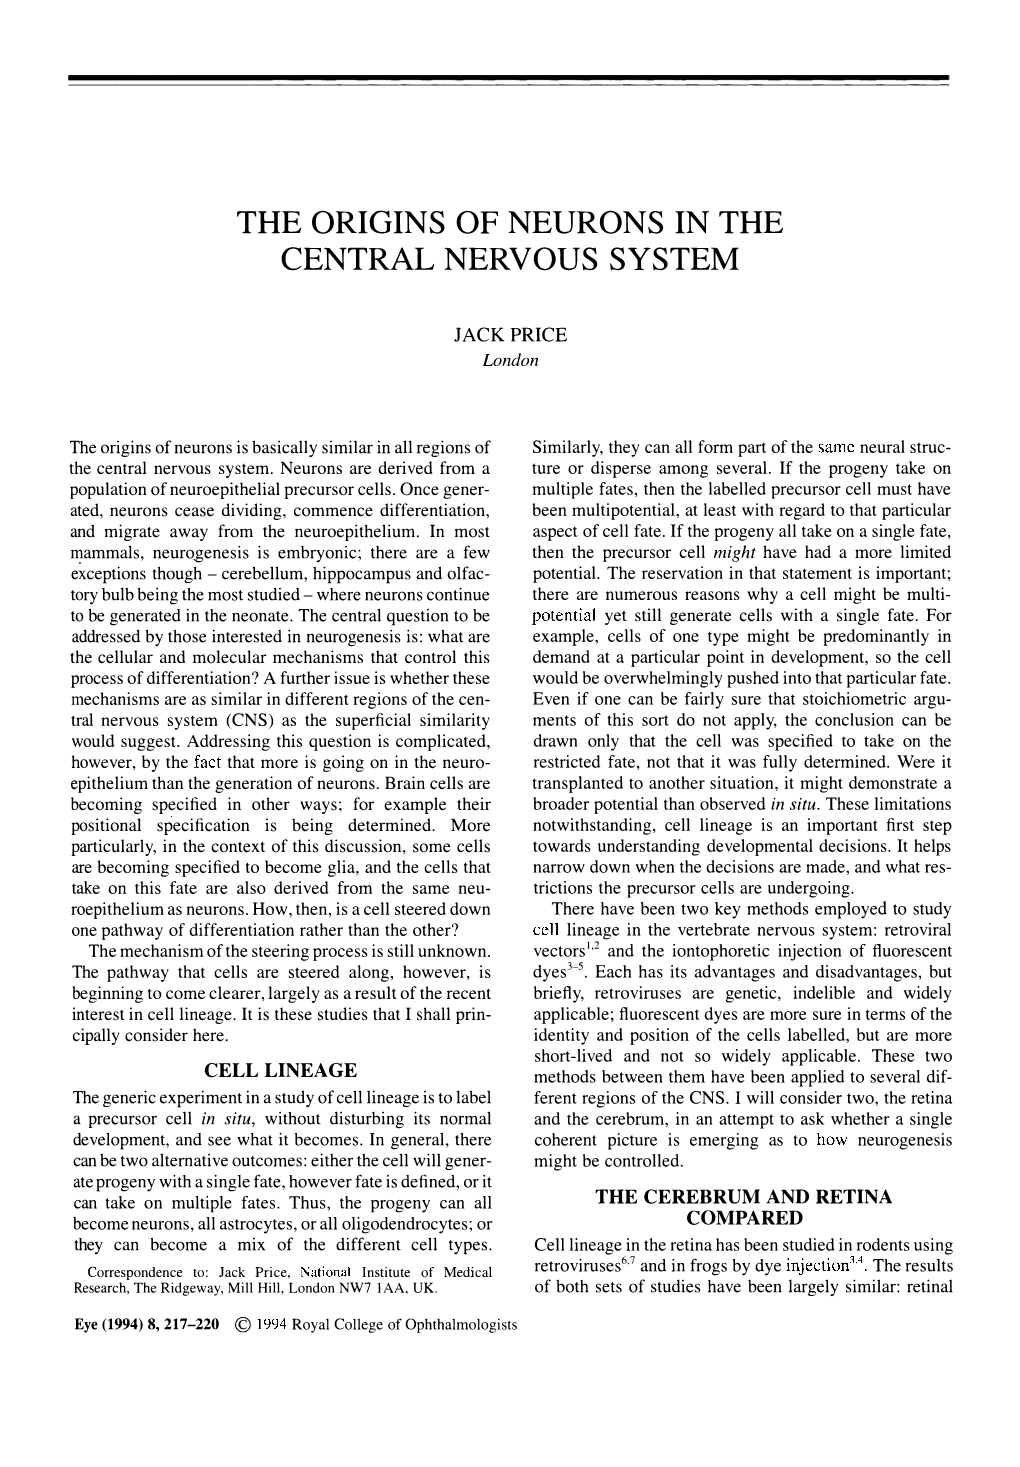 The Origins of Neurons in the Central Nervous System